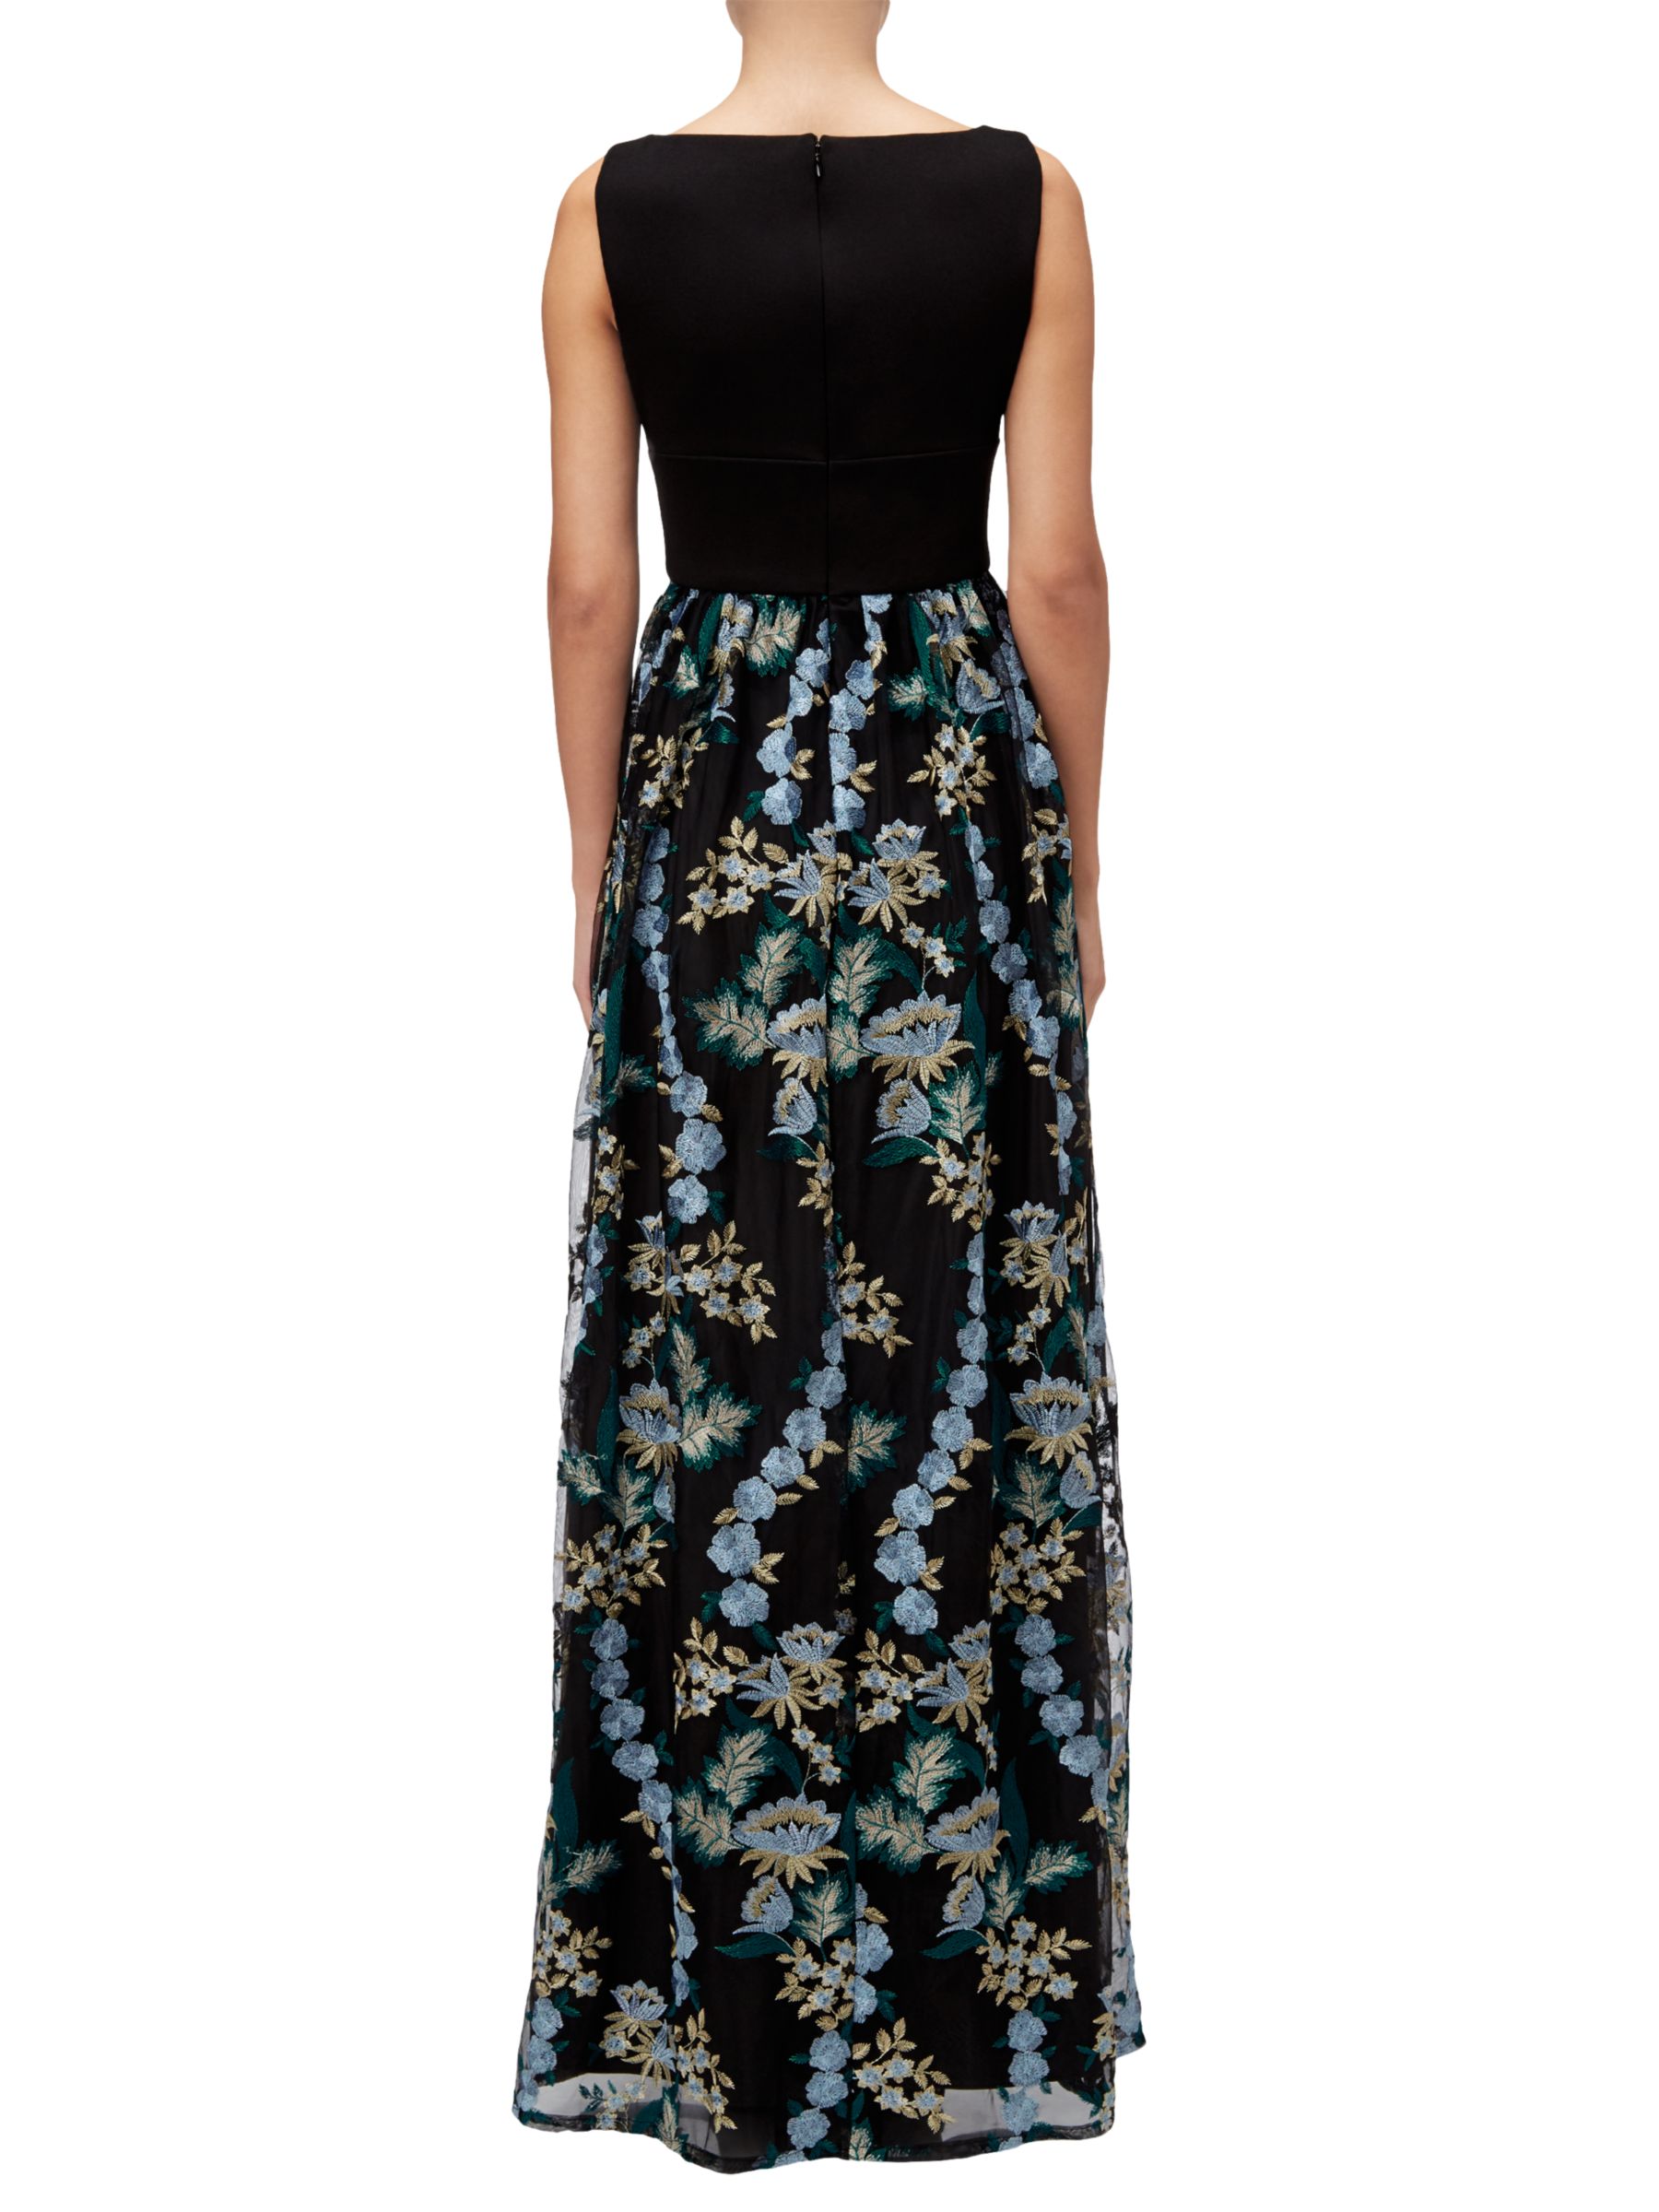 Adrianna Papell Embroidered Tulle Maxi Dress, Black/Multi